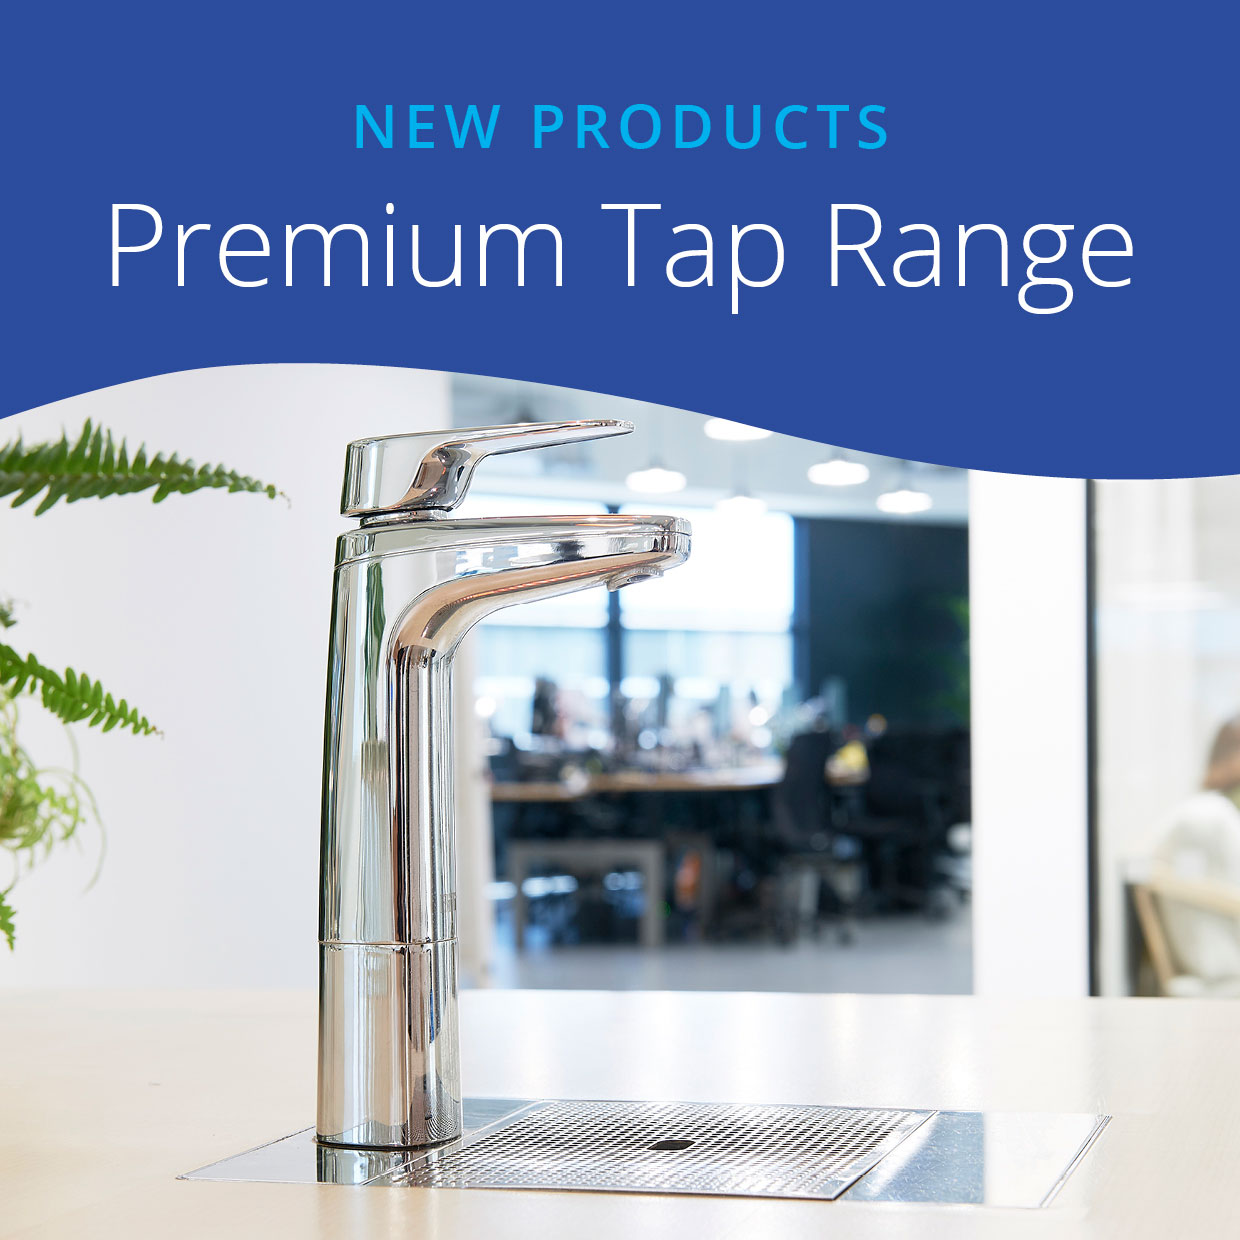 New Drinking Water Taps